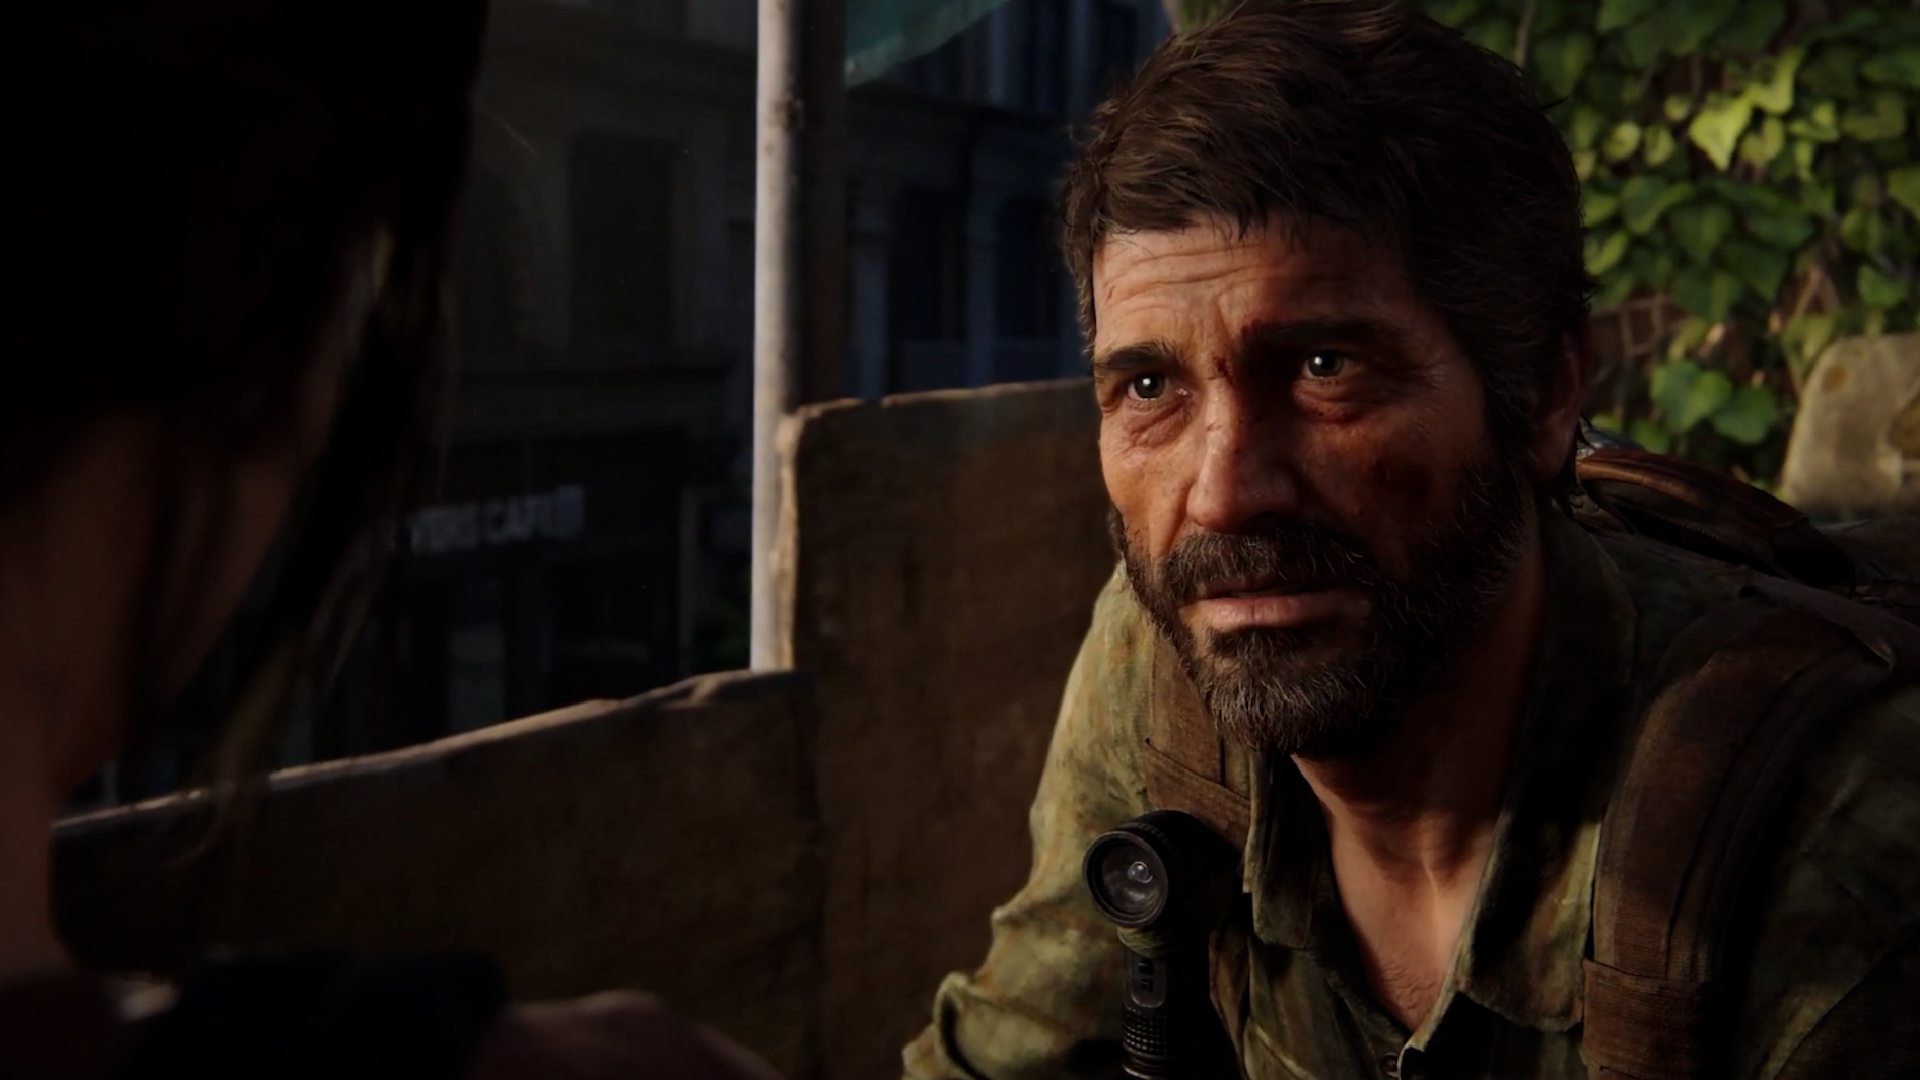 Is The Last of Us Part 1 Remake coming to PS4?